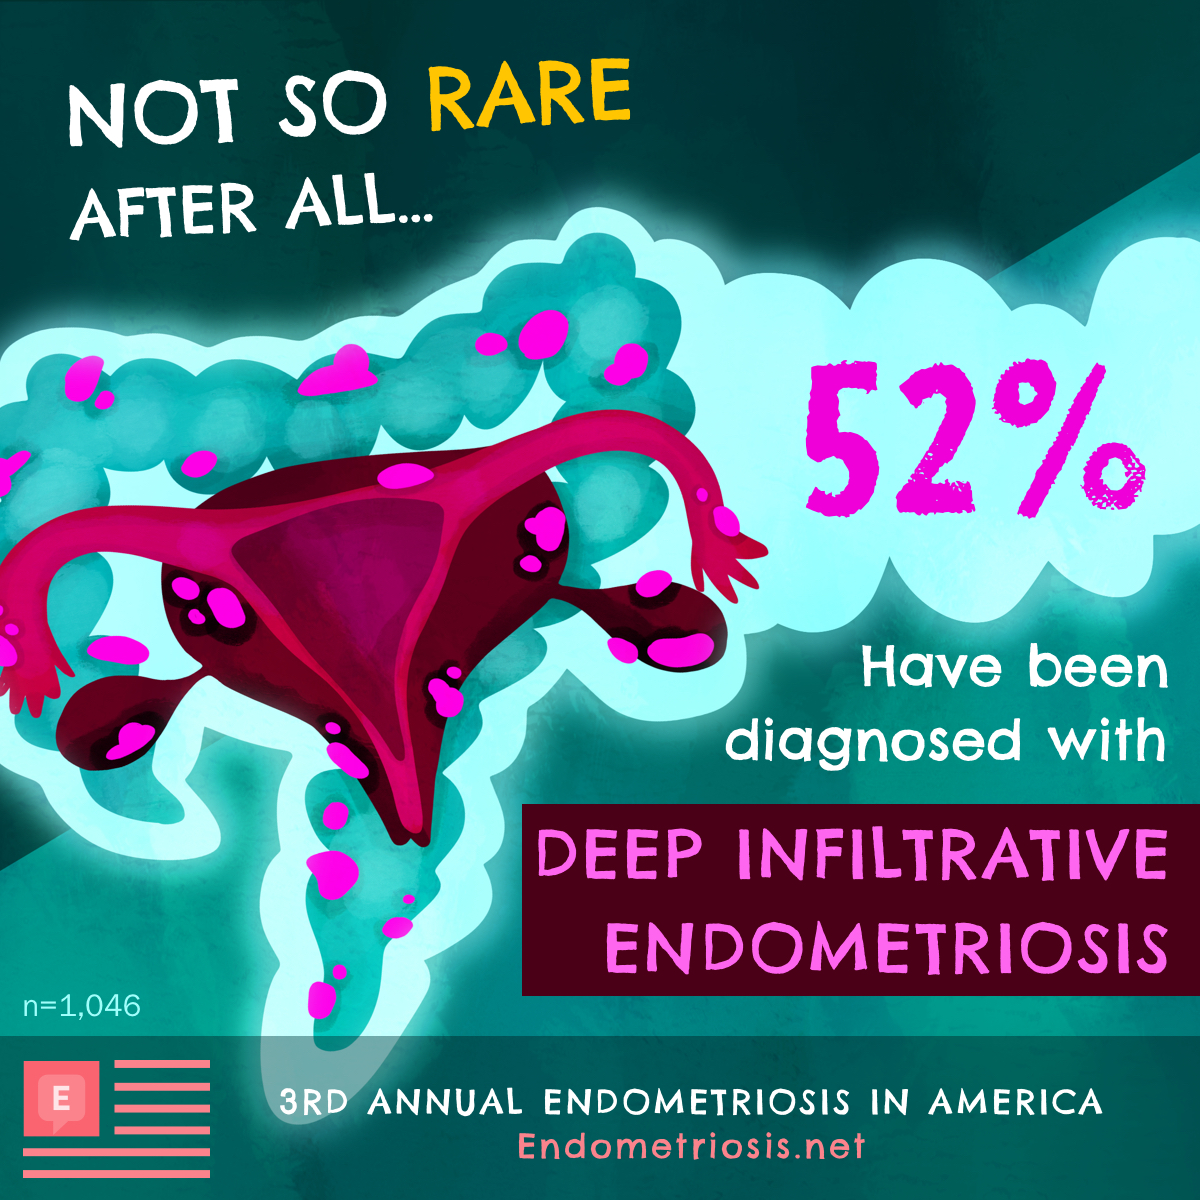 52% have been diagnosed with deep infiltrative endometriosis.